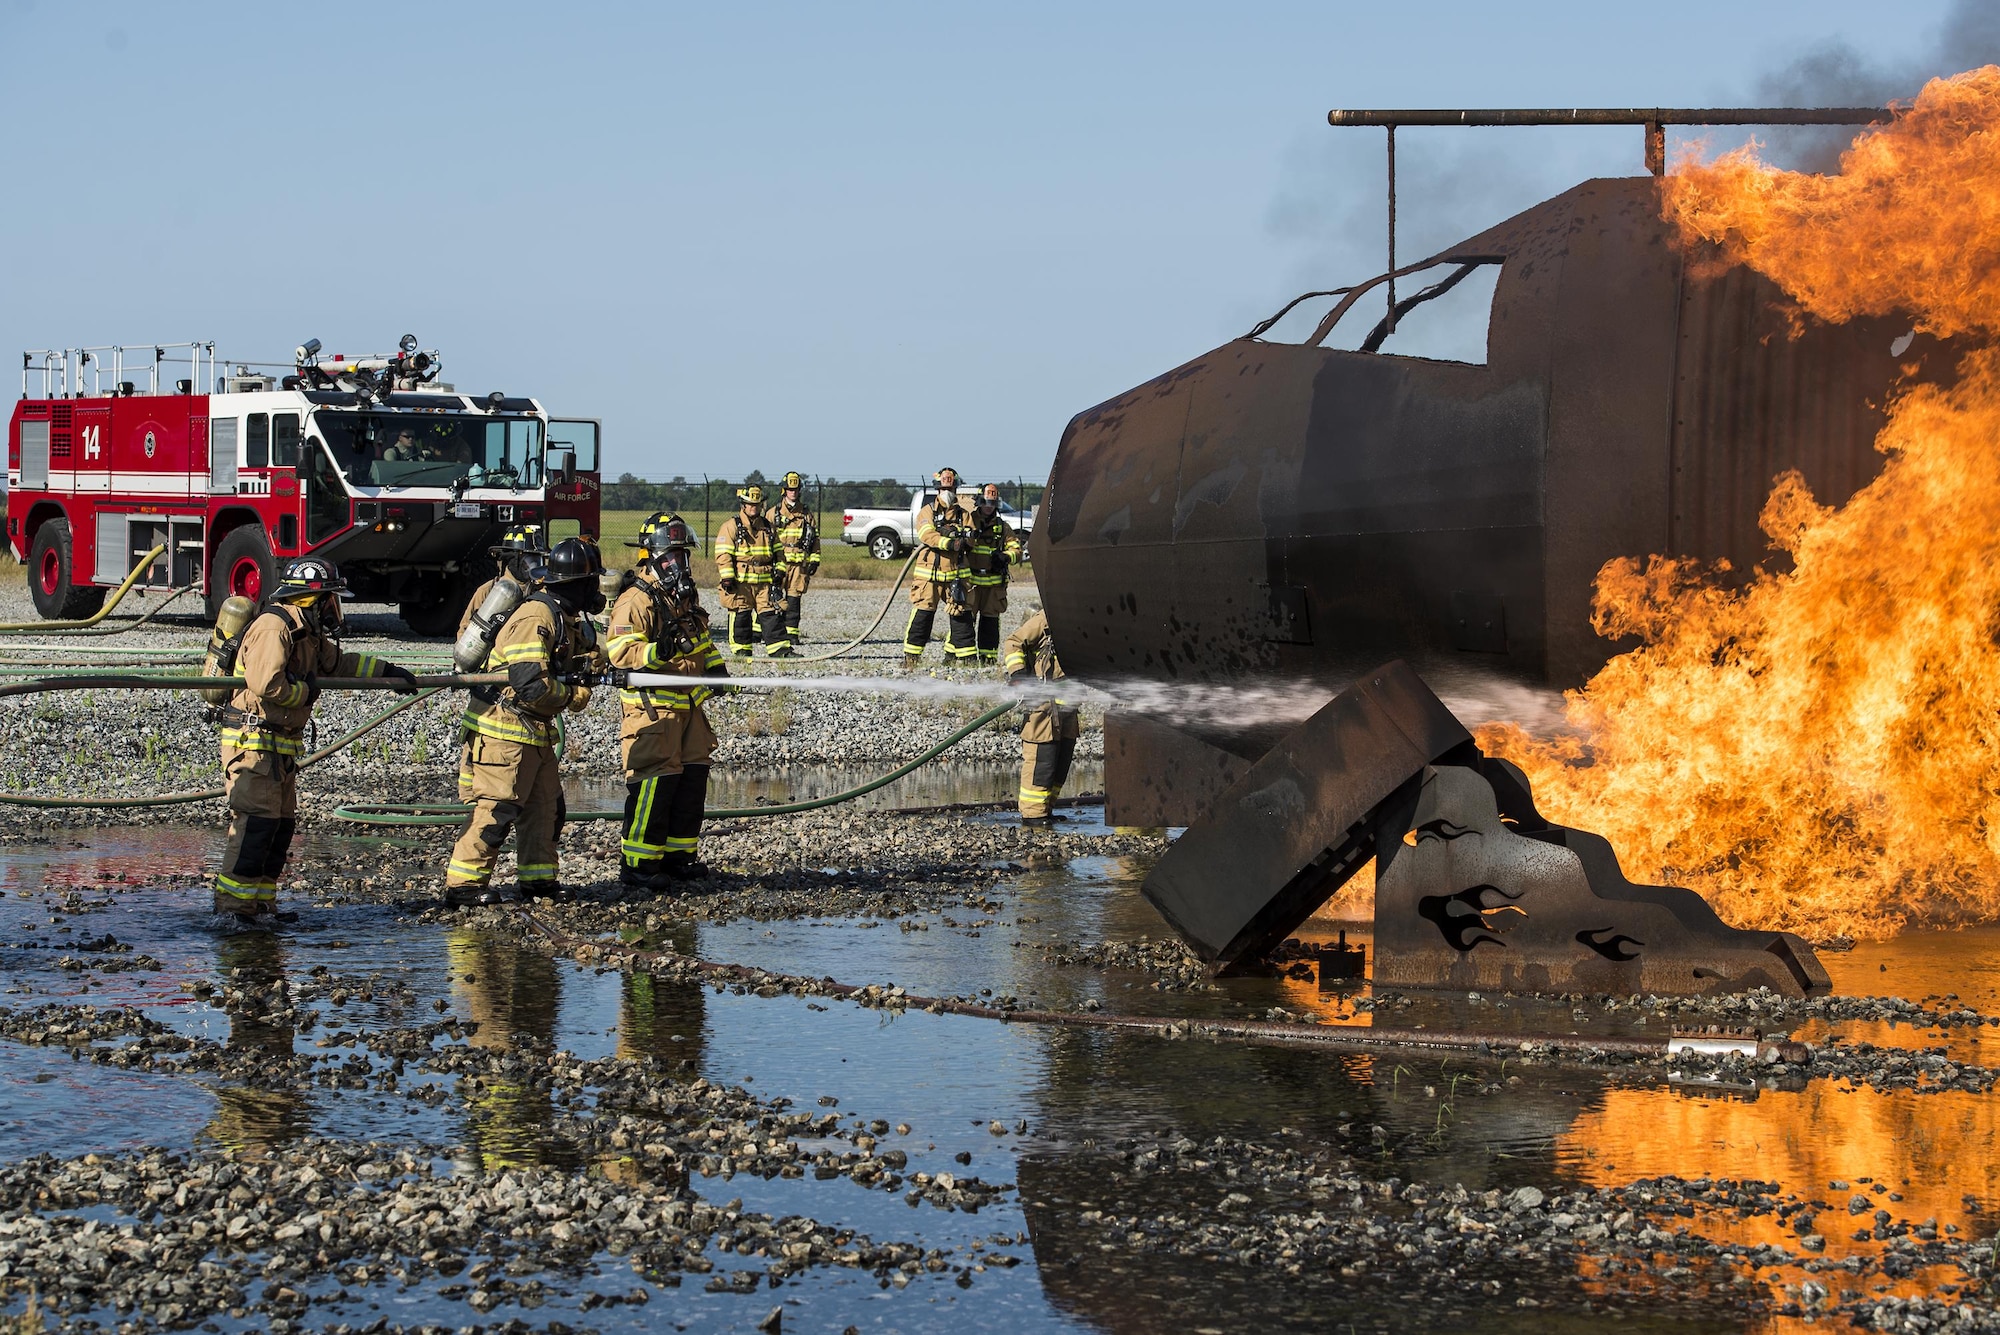 Firefighters from the Valdosta Fire Department and Moody’s Civil Engineer Squadron practice water-spraying techniques during aircraft live fire training, April 26, 2016, at Moody Air Force Base, Ga. Firefighters are required to conduct this training twice a year. (U.S. Air Force photo by Airman 1st Class Janiqua P. Robinson/Released)